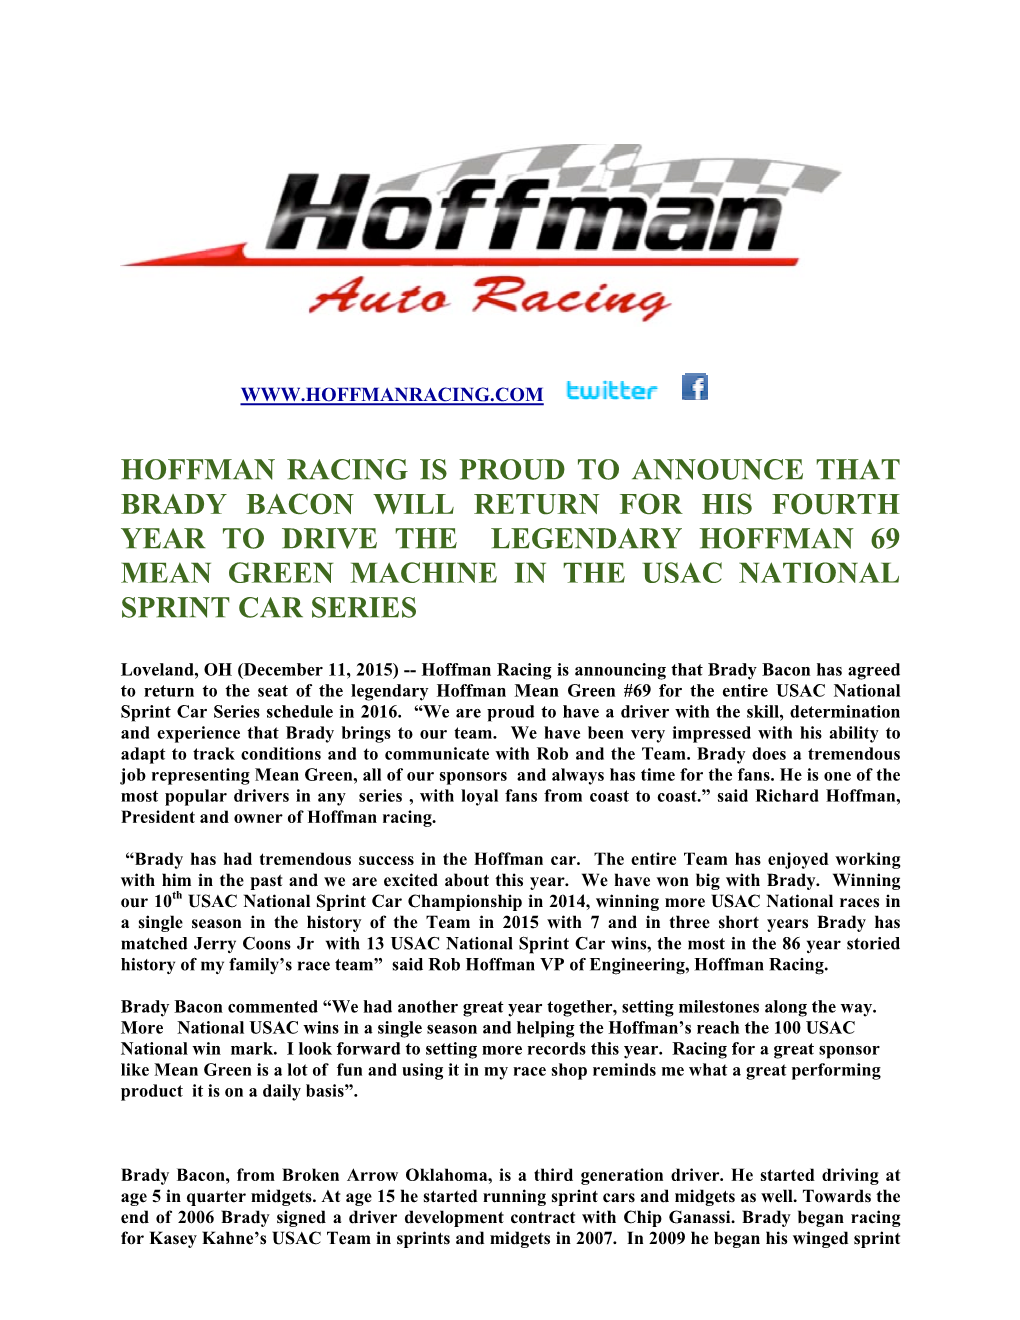 Hoffman Racing Is Proud to Announce That Brady Bacon Will Return for His